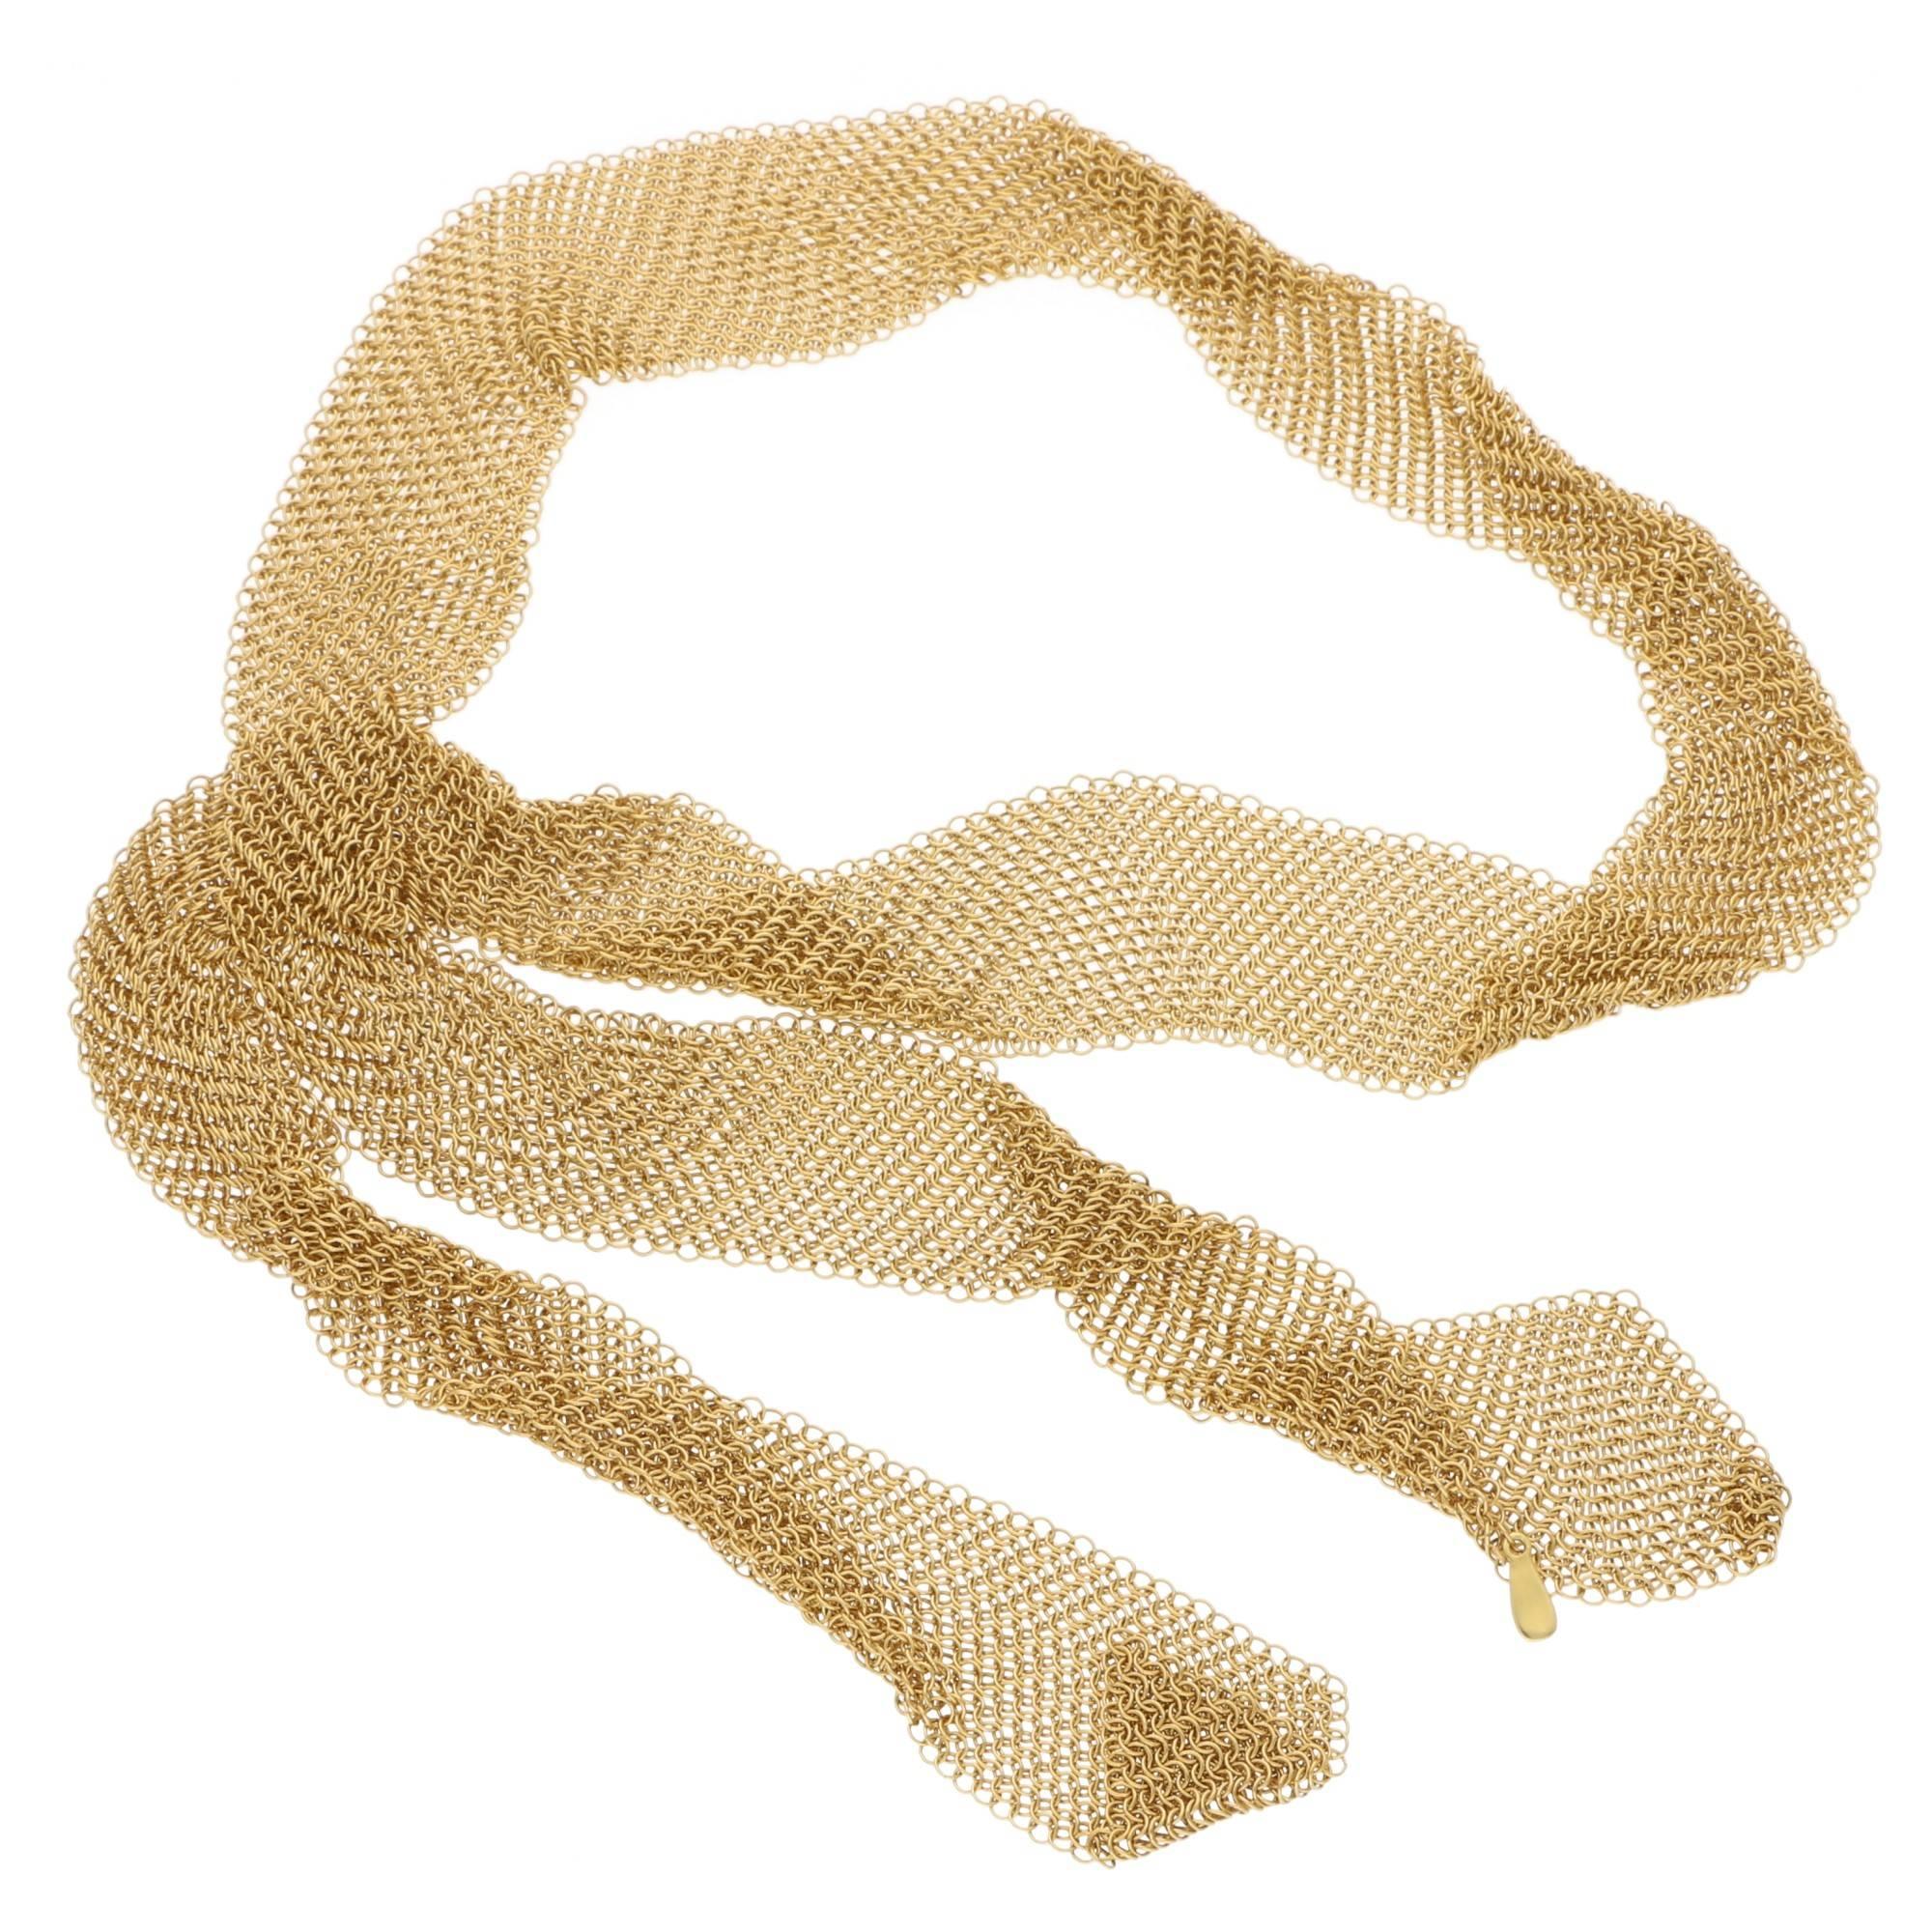 A truly exceptional Tiffany & Co. 18 carat yellow gold mesh necklace by Elsa Peretti. The exquisite necklace is intricately designed in the form of a scarf which tapers diagonally at each end. This exceptional piece is extremely flexible and can be